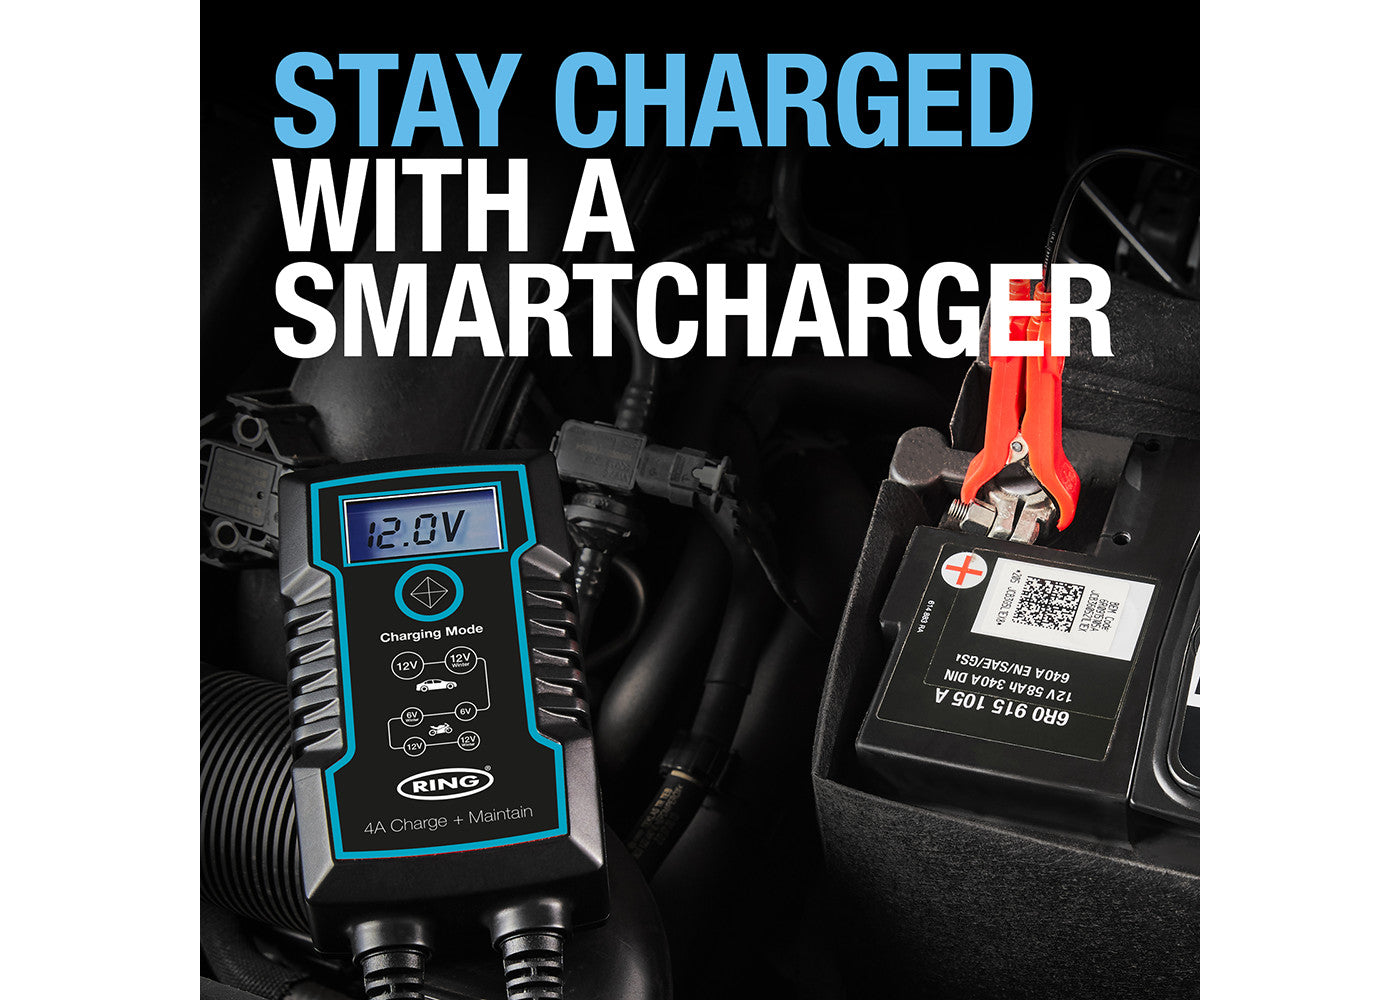 Ring Automotive 4A Smart Charger & Battery Maintainer - maplin.co.uk